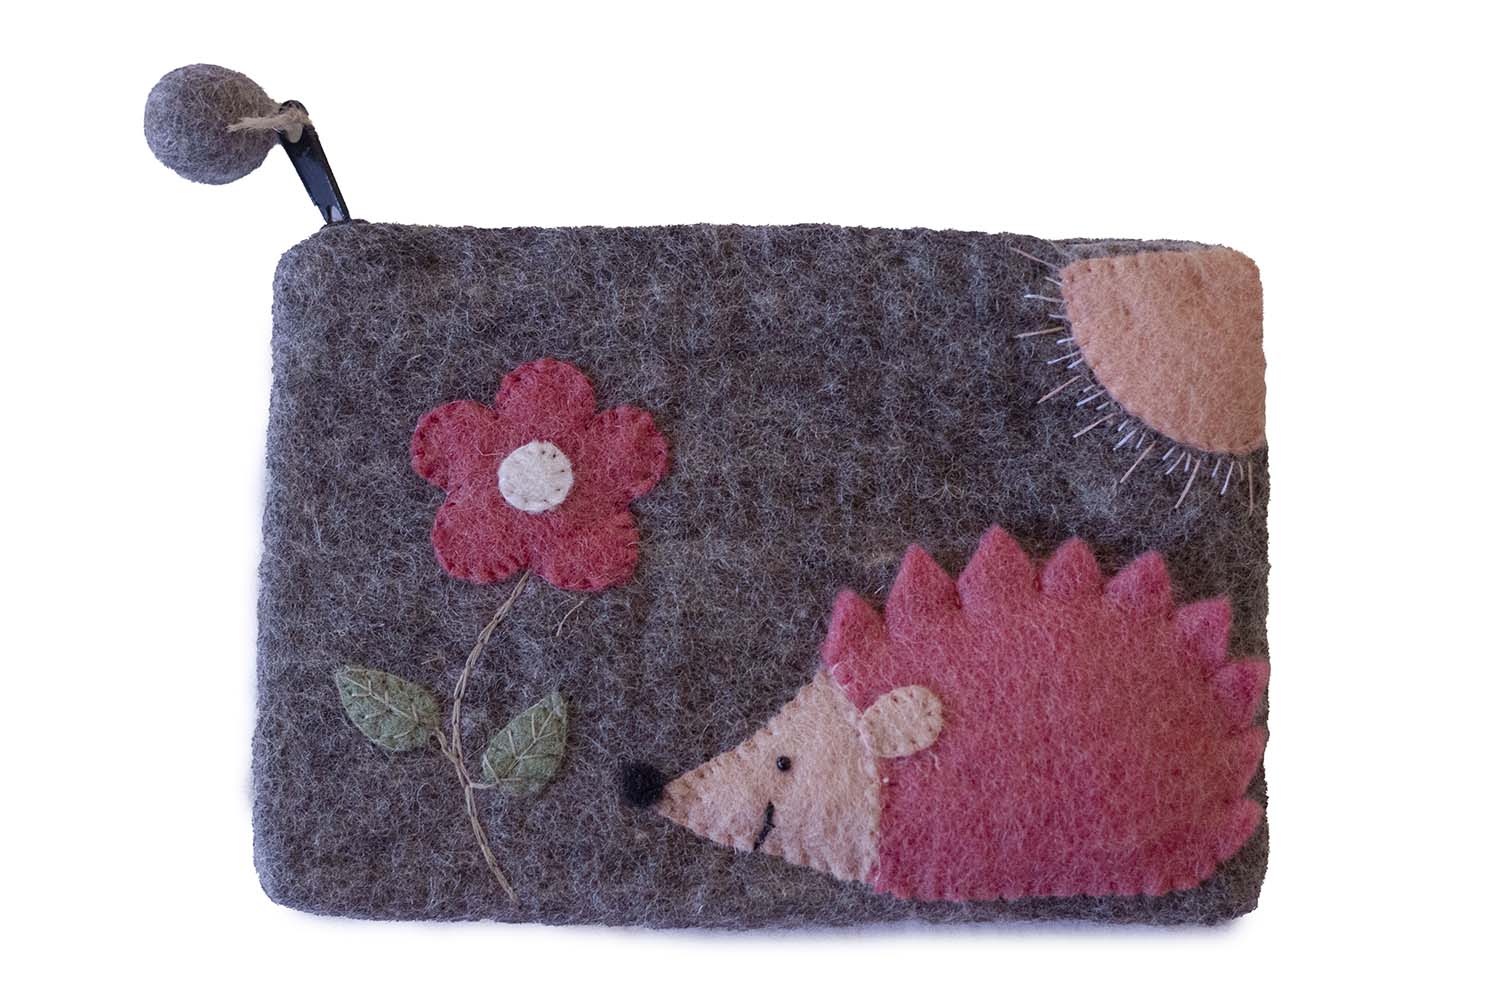 This Global Groove Life, handmade, ethical, fair trade, eco-friendly, sustainable, grey felt zipper coin pouch was created by artisans in Kathmandu Nepal and is adorned with an adorable hedgehog, flower and sun motif.